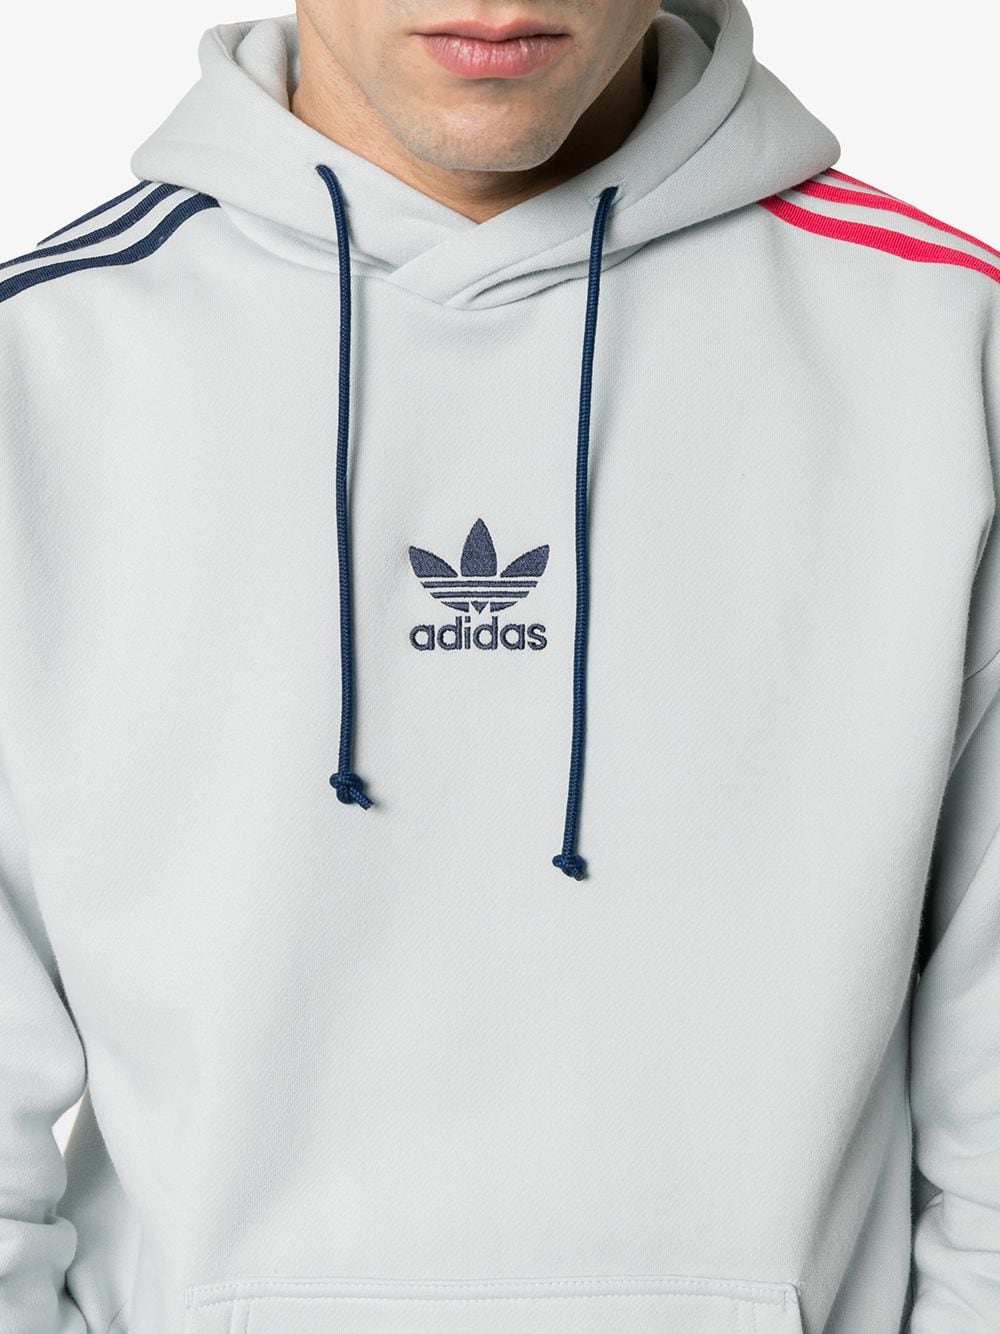 Adidas contrasting striped sleeves hoodie $80 - Buy Online - Mobile  Friendly, Fast Delivery, Price